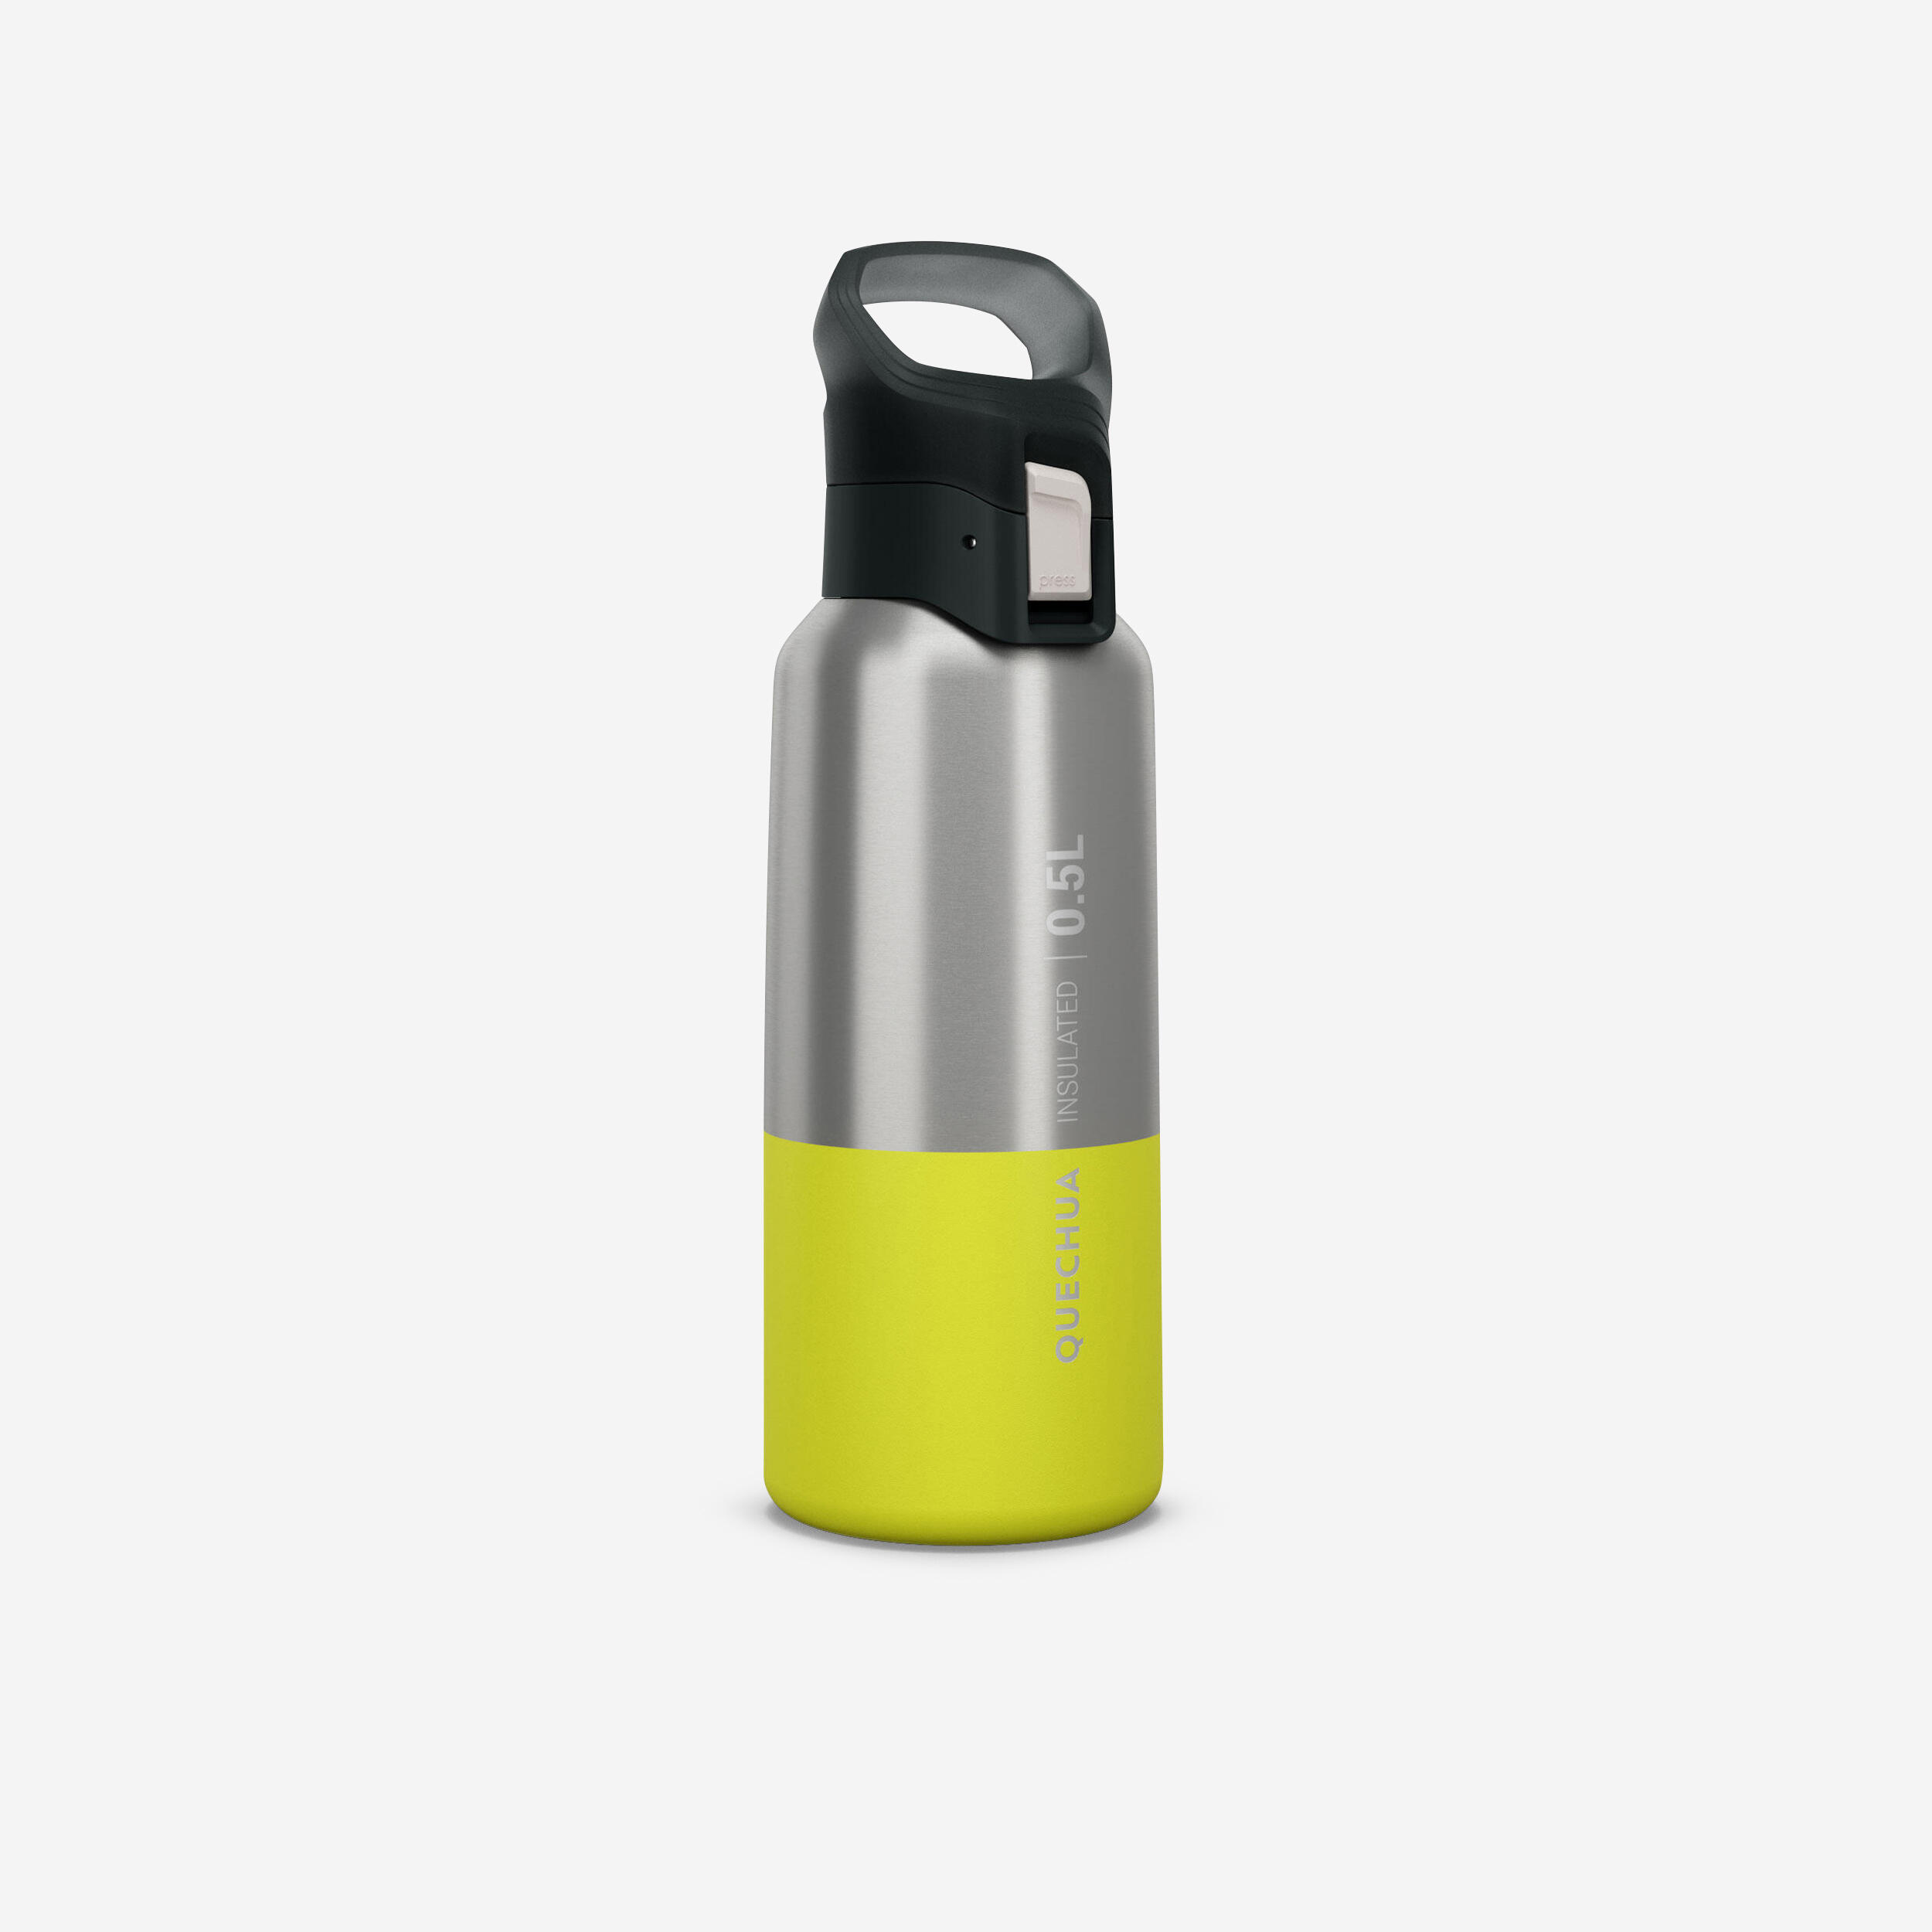 QUECHUA Isothermal Stainless Steel Hiking Flask MH500 0.5L - Yellow